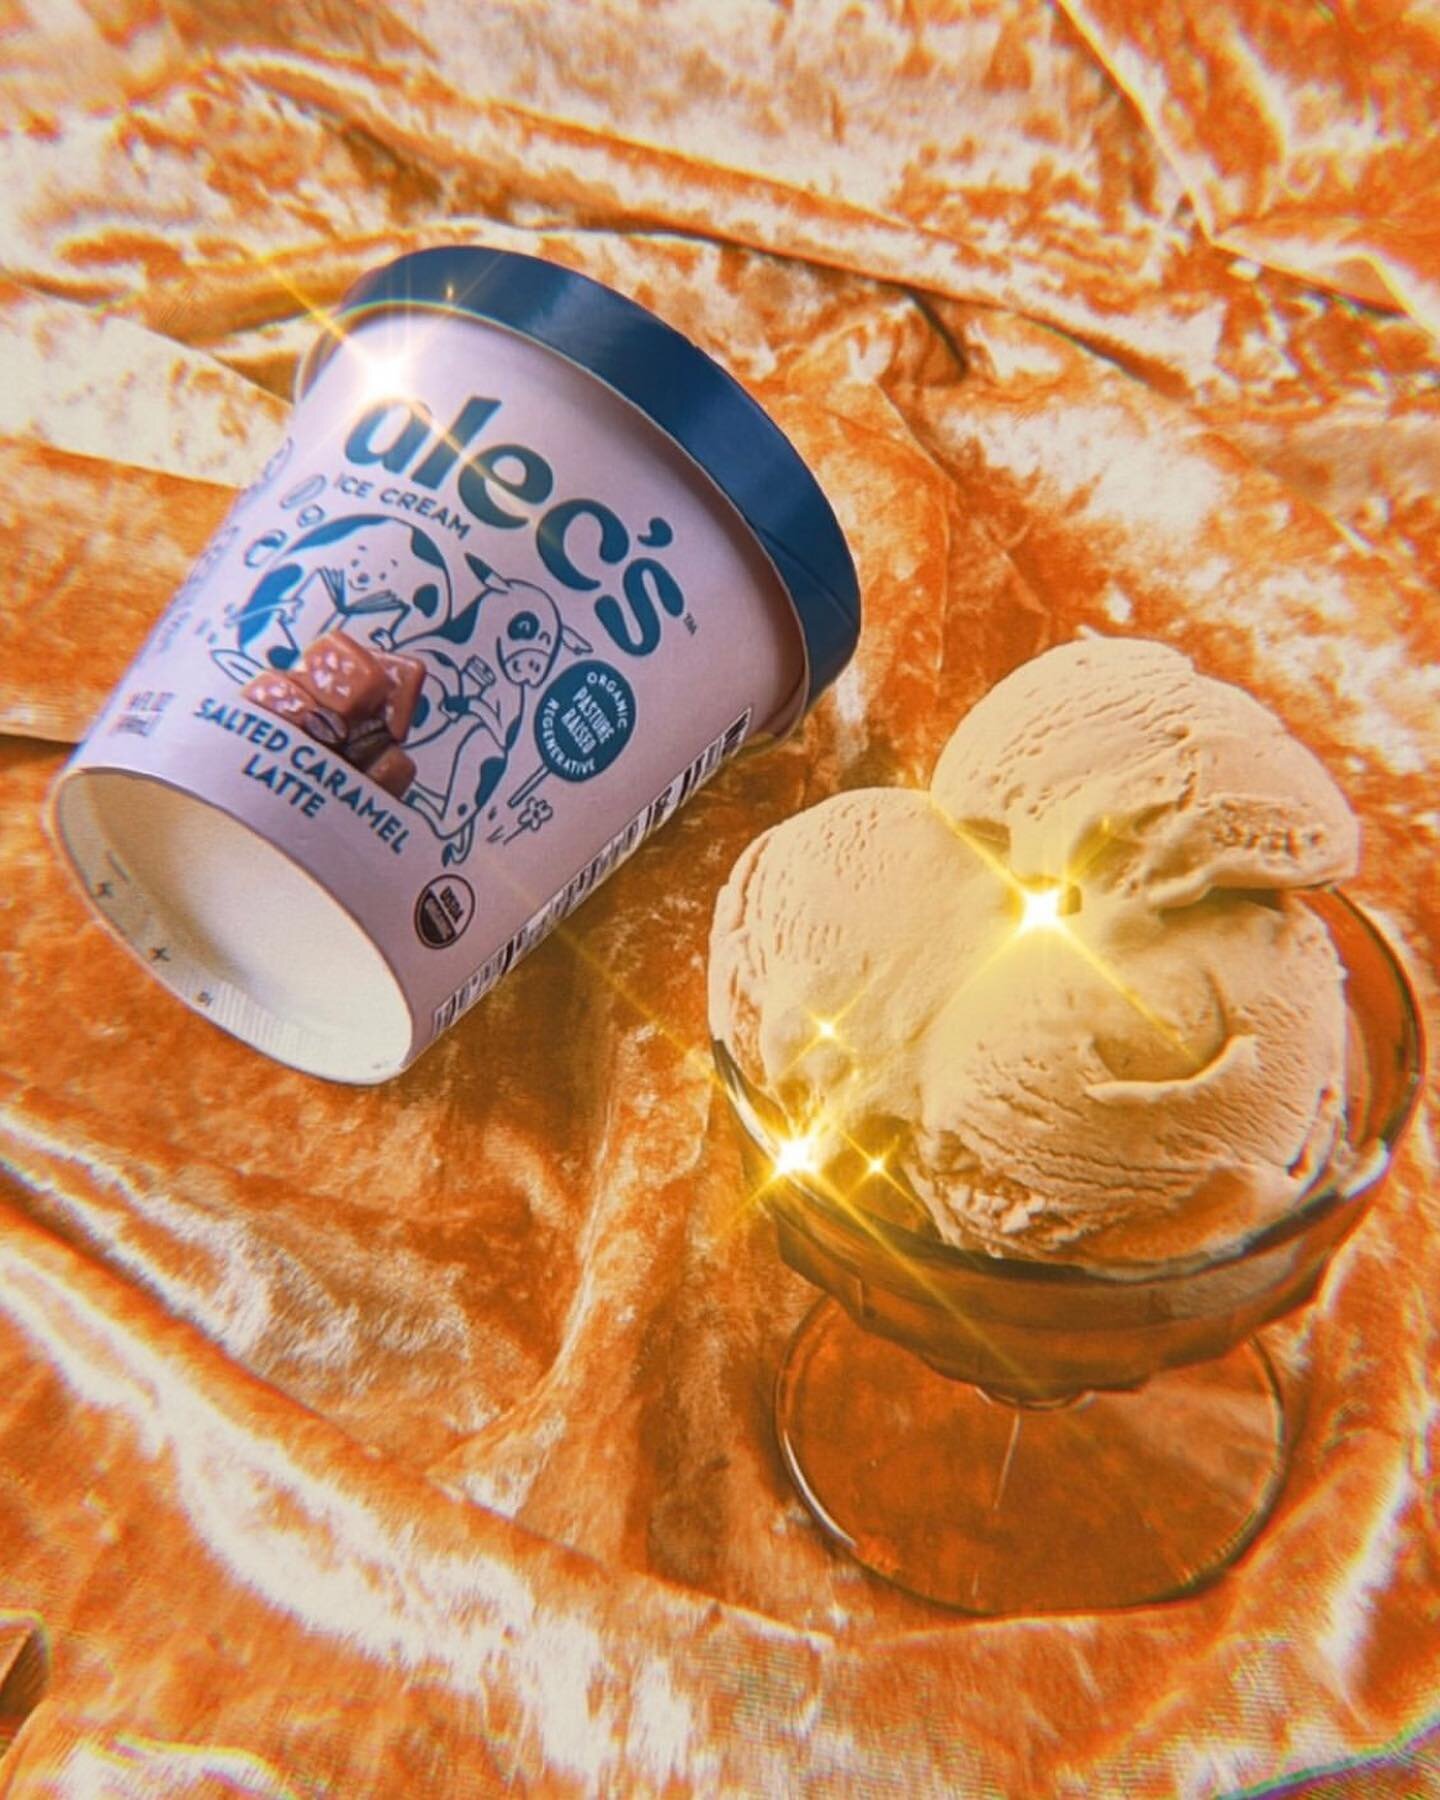 &quot;I'm coming in hot (cold?) with my full-throated endorsement of Alec's Ice Cream. Made in Northern California using single-source dairy from a family operated farm, Alec's Ice Cream is extremely luscious&mdash;just shy of custardy&mdash;and deep